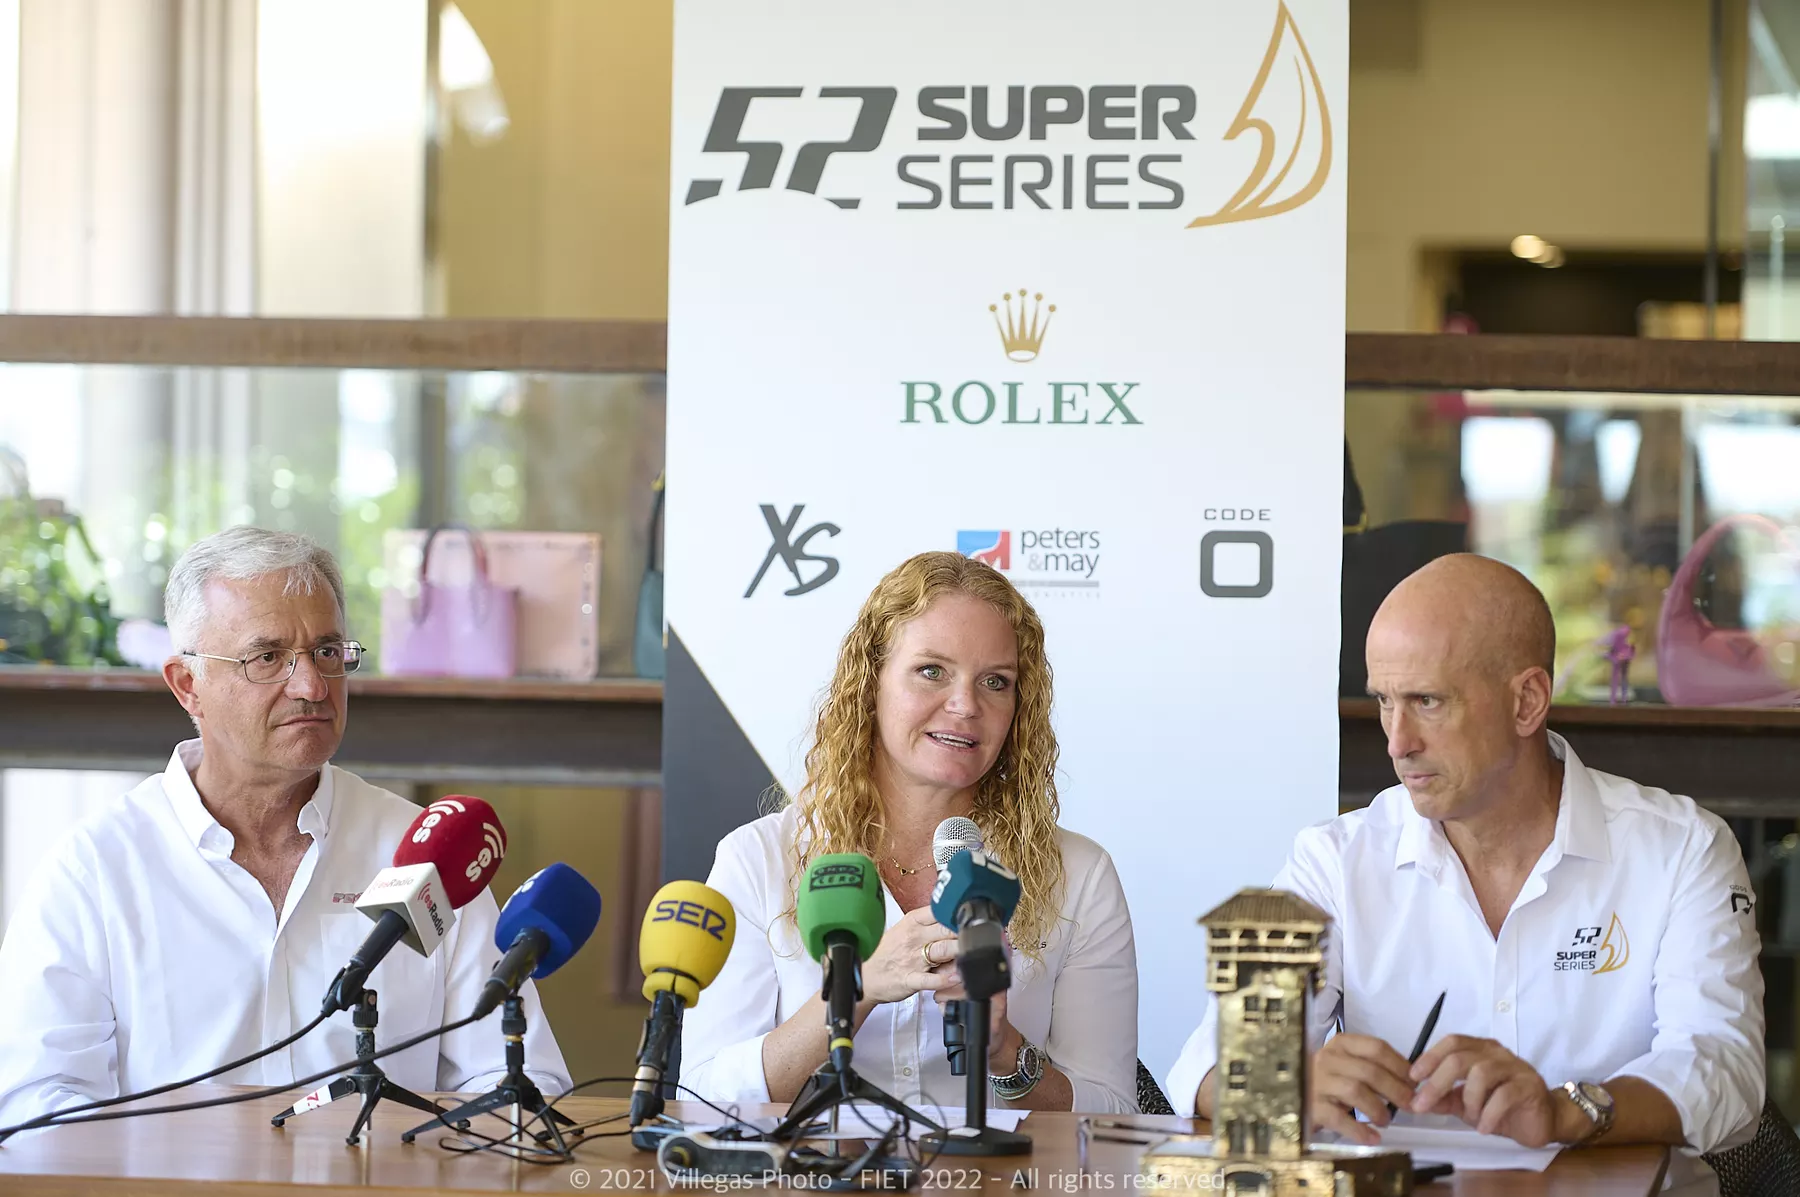 THE 52ND SUPER SERIES SAILING WEEK RETURNS TO PUERTO PORTALES